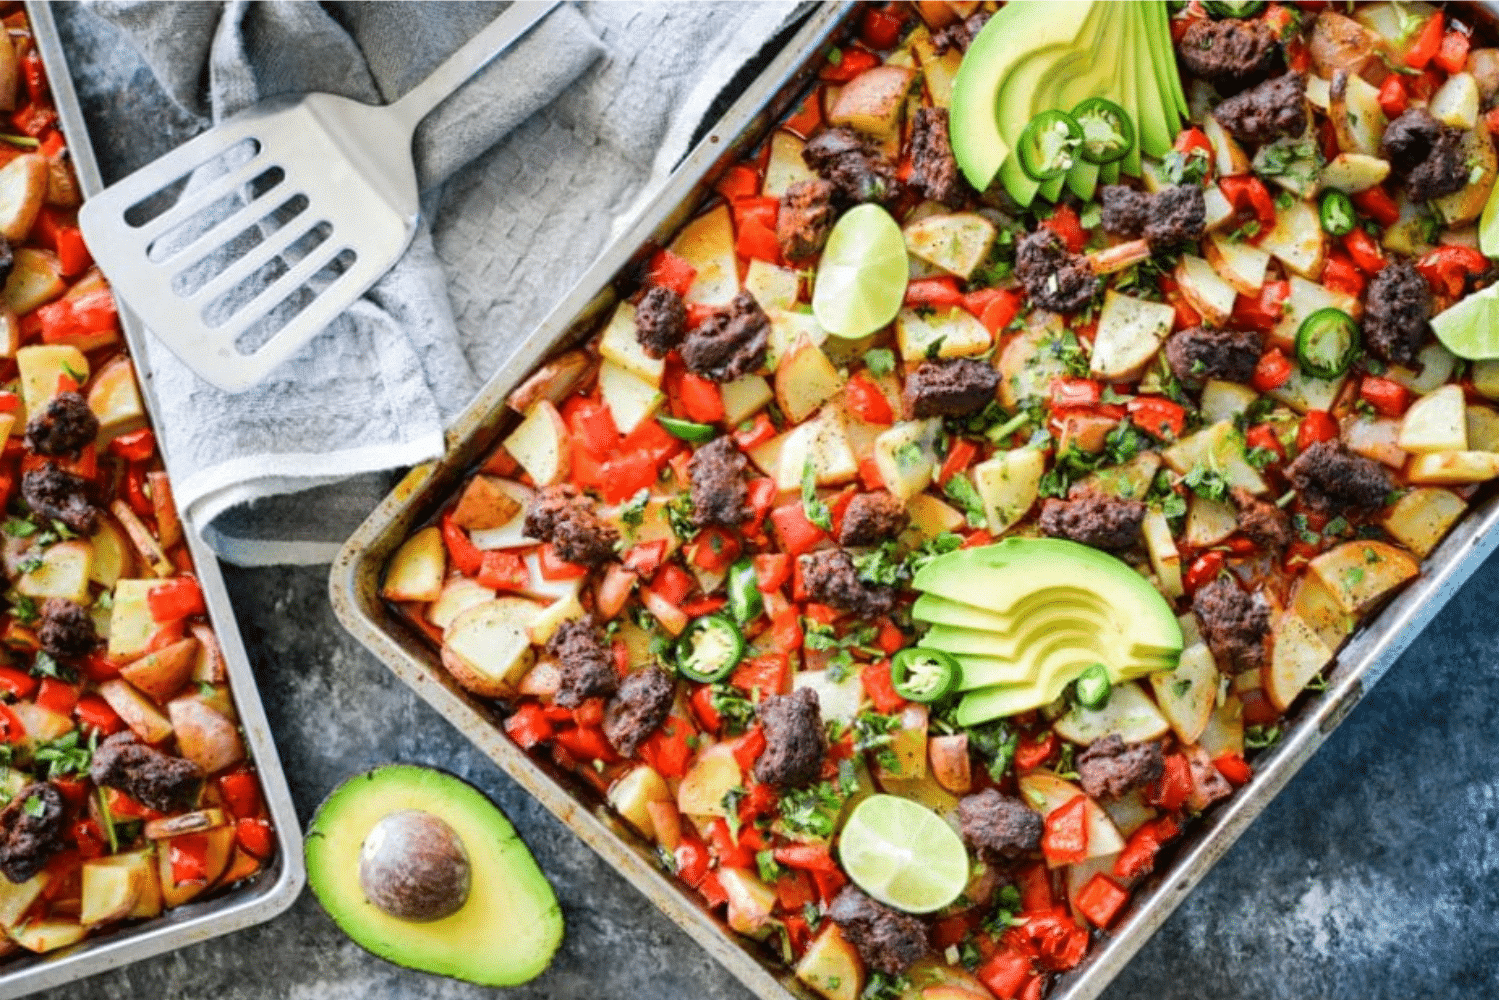 colorful potato hash with red bell peppers, chorizo, potatoes, sliced avocado, and lime wedges on a stainless steel baking sheet on a dark grey surface with a grey towel and spatula alongside it